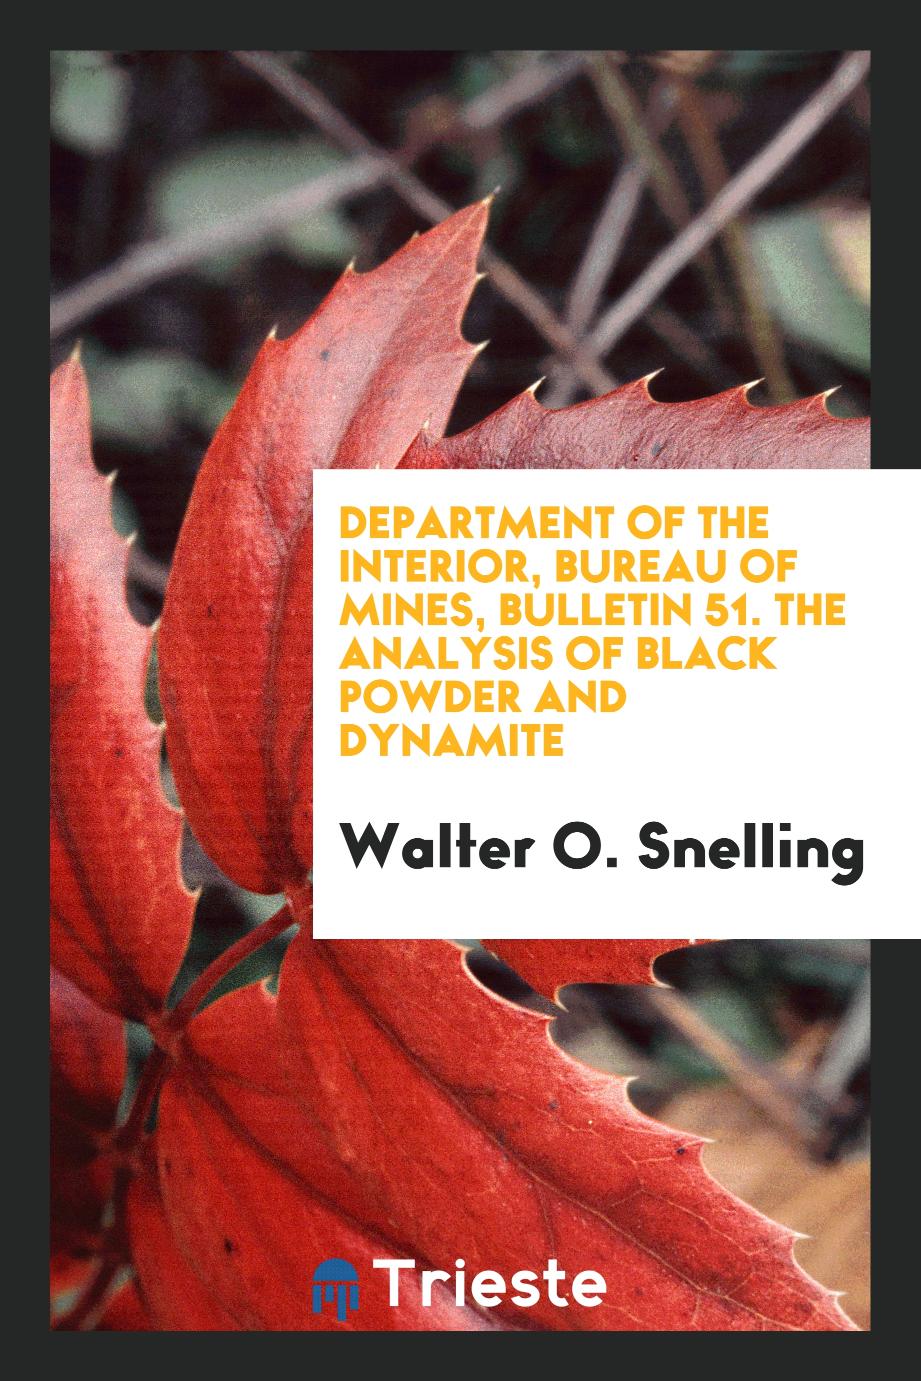 Department of the interior, Bureau of Mines, Bulletin 51. The Analysis of Black Powder and Dynamite